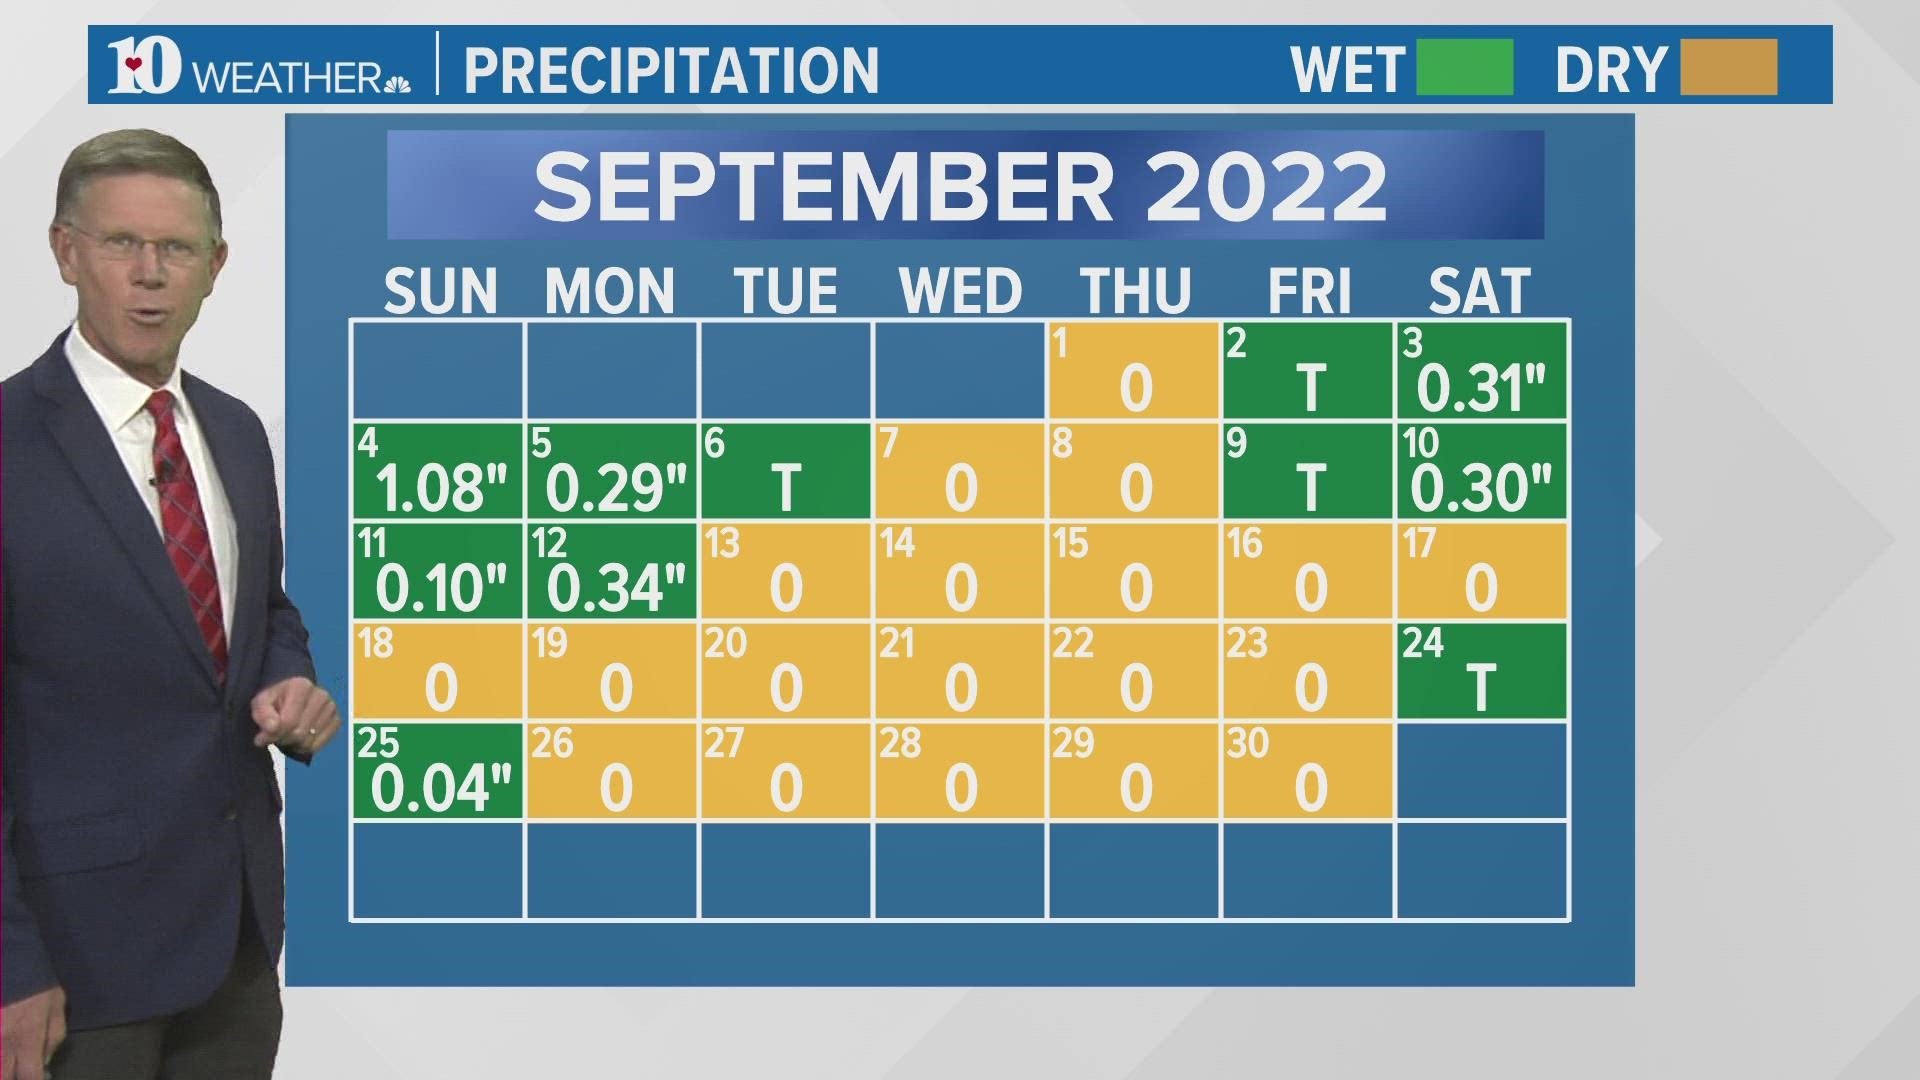 September 2022 was drier than normal but was also a little cooler than average.